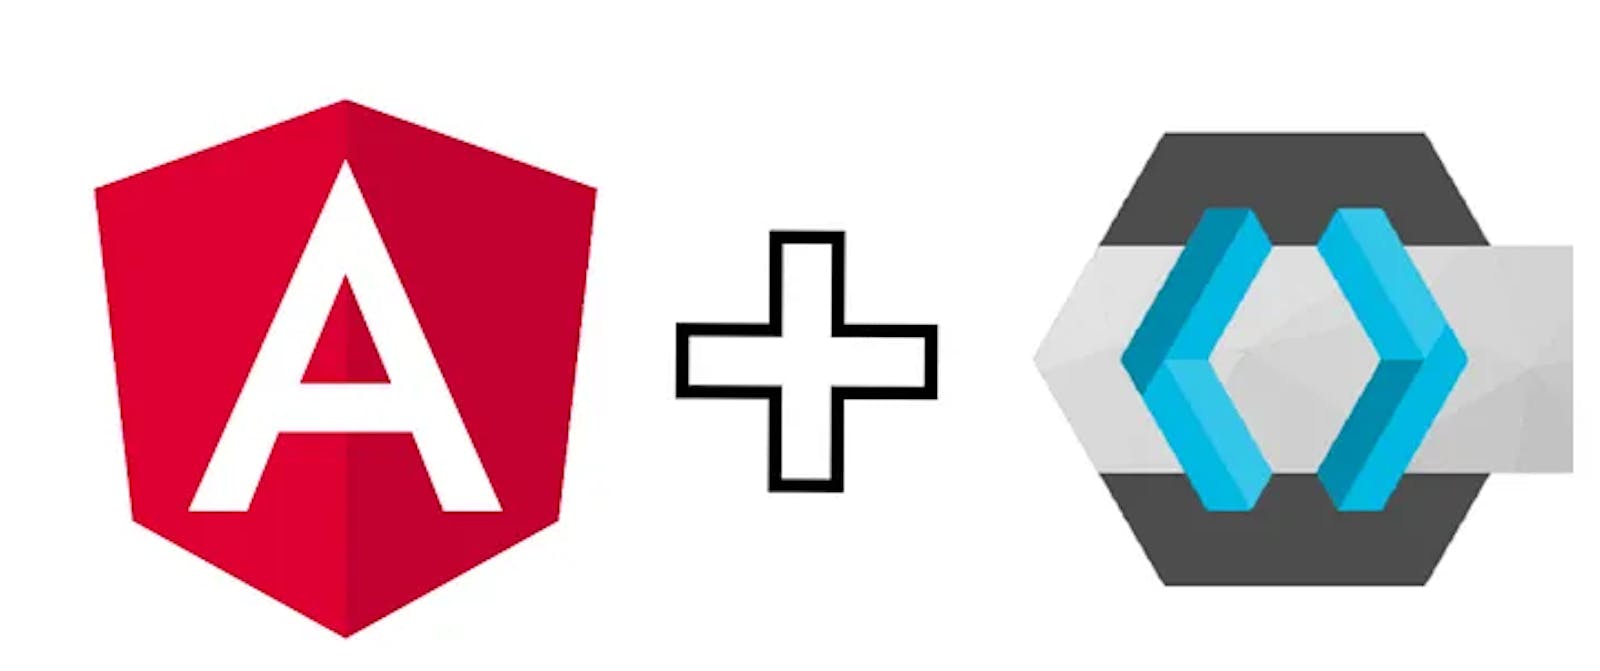 Setting Up Keycloak Authentication in Angular 17 using Standalone Projects